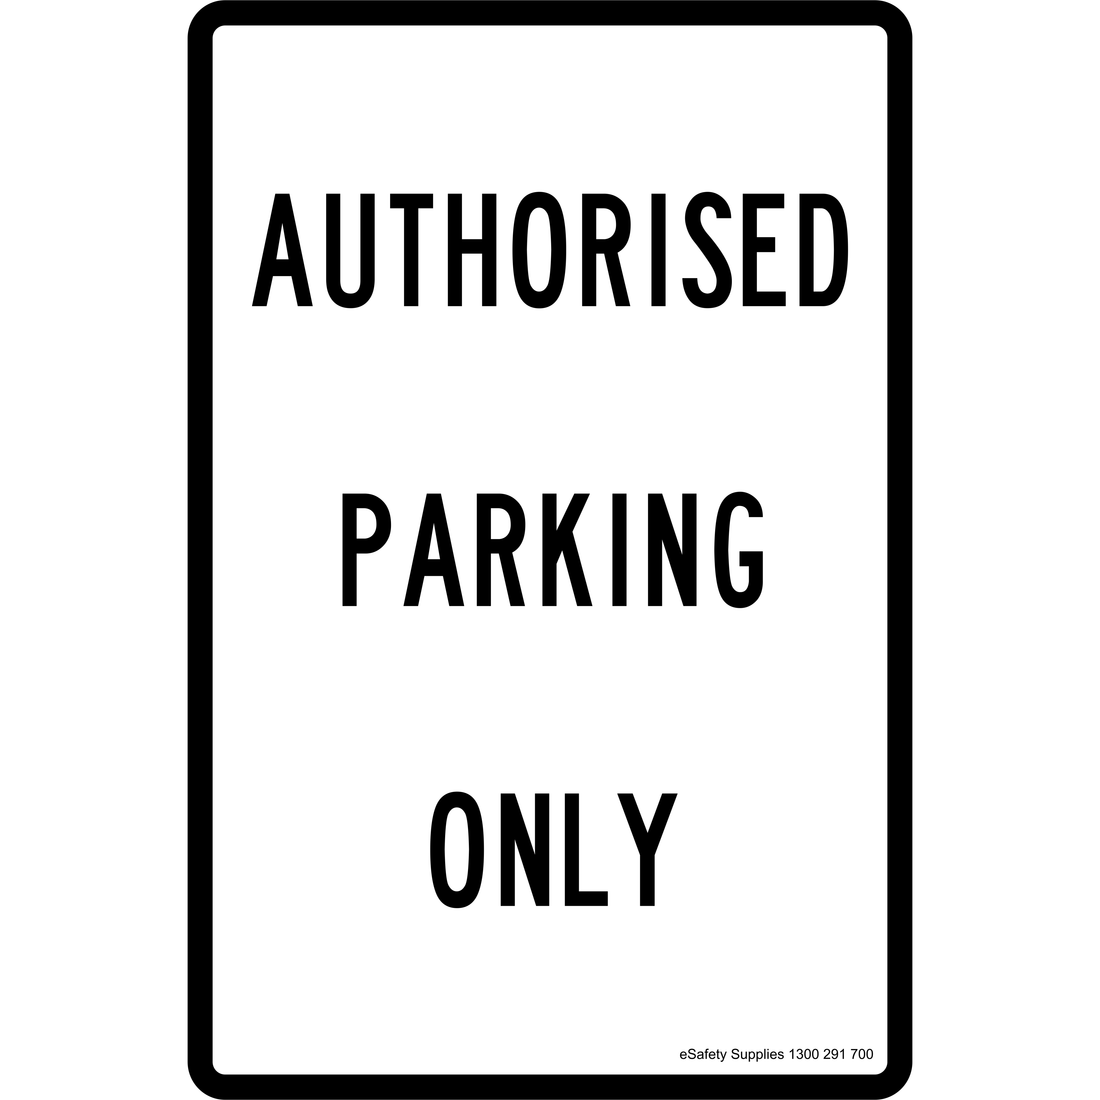 300x450 - Authorised Parking Only